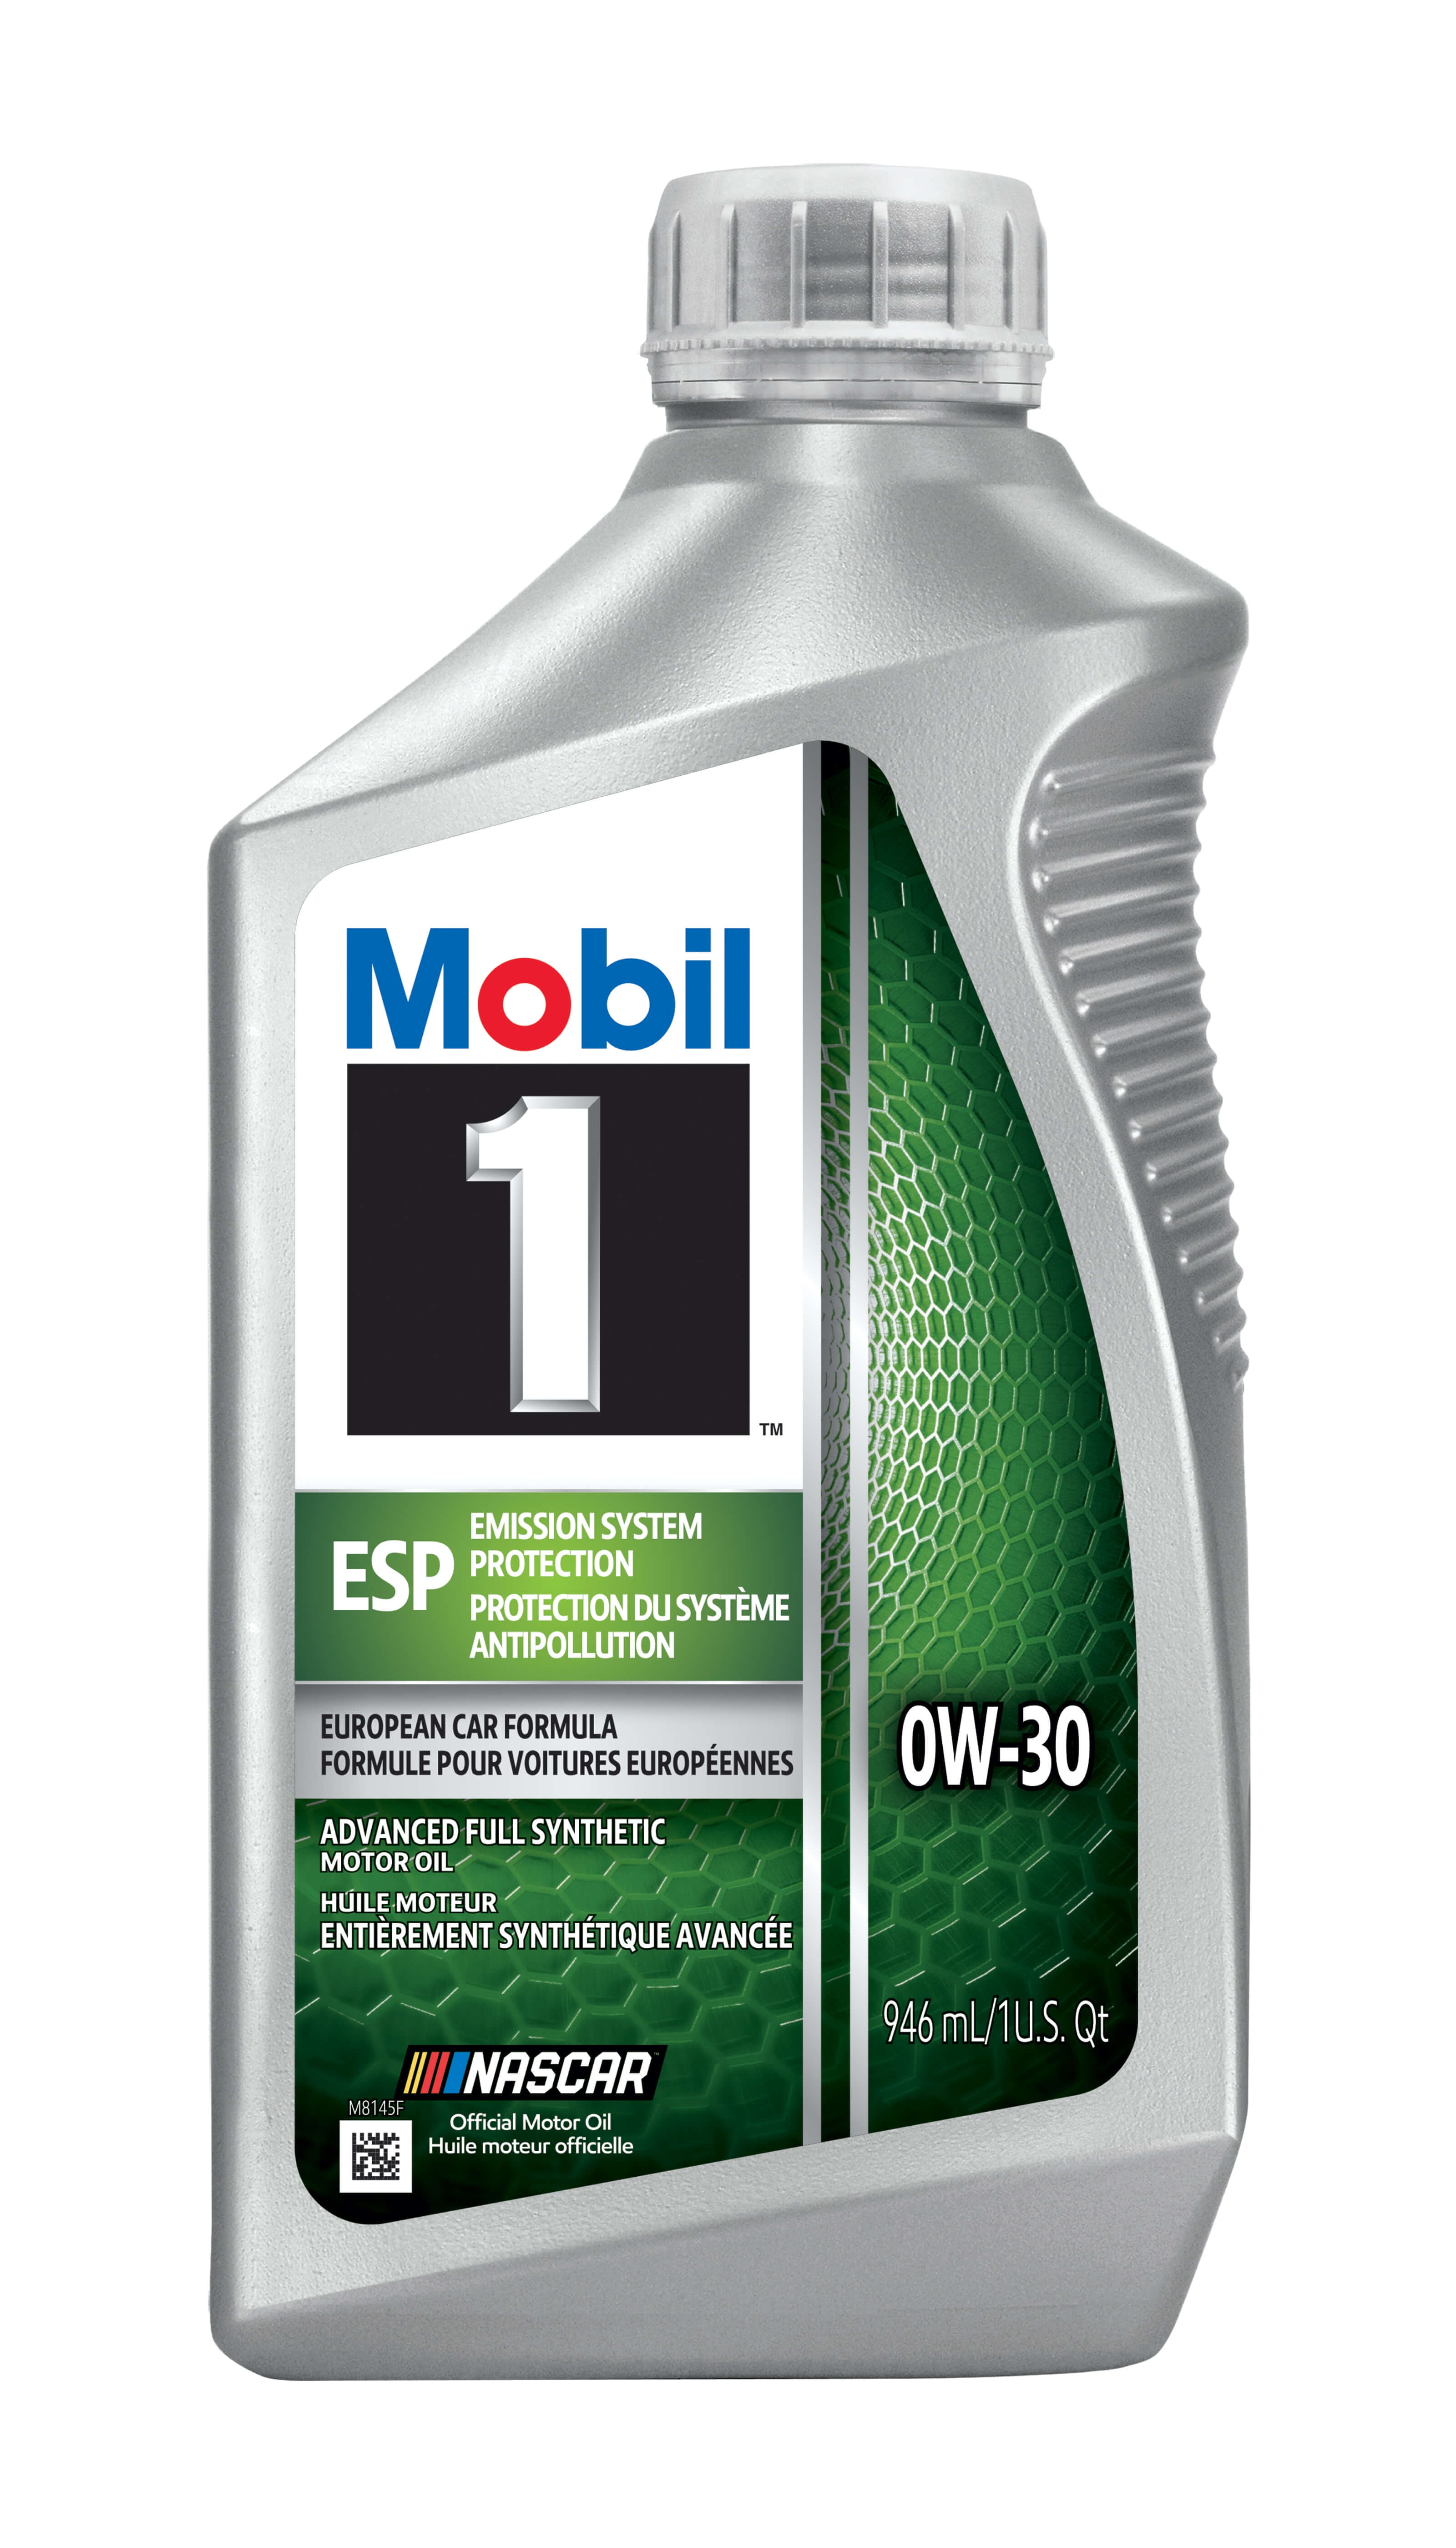 How Much Is Mobil 1 Synthetic Oil At Walmart